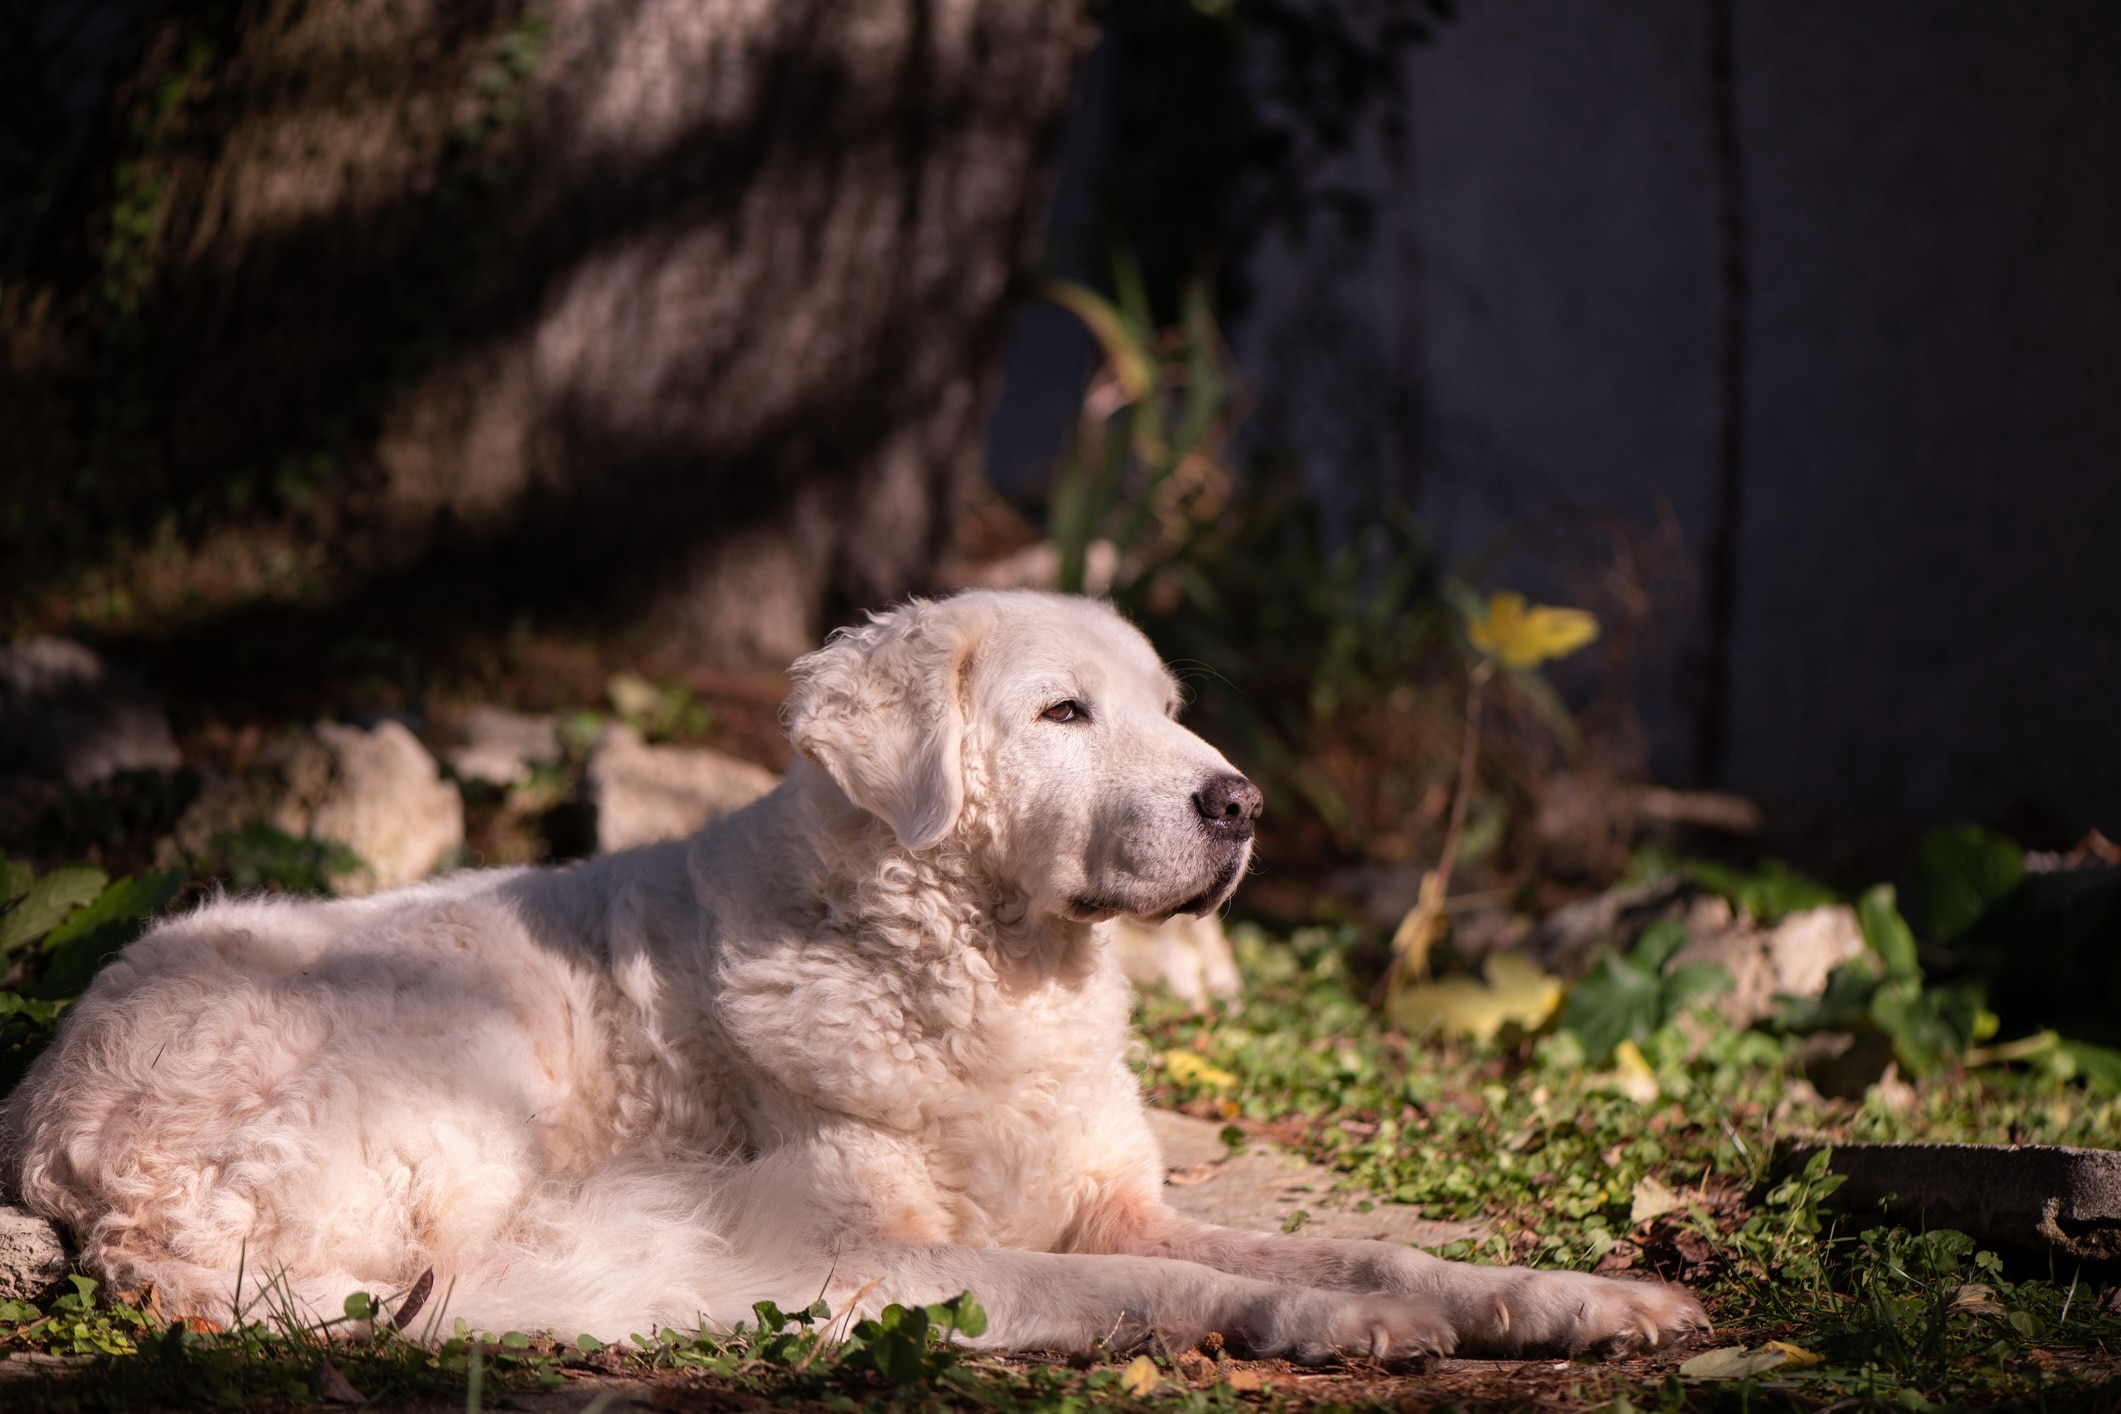 white kuvasz lying in a wooded area with sunlight filtering through the trees